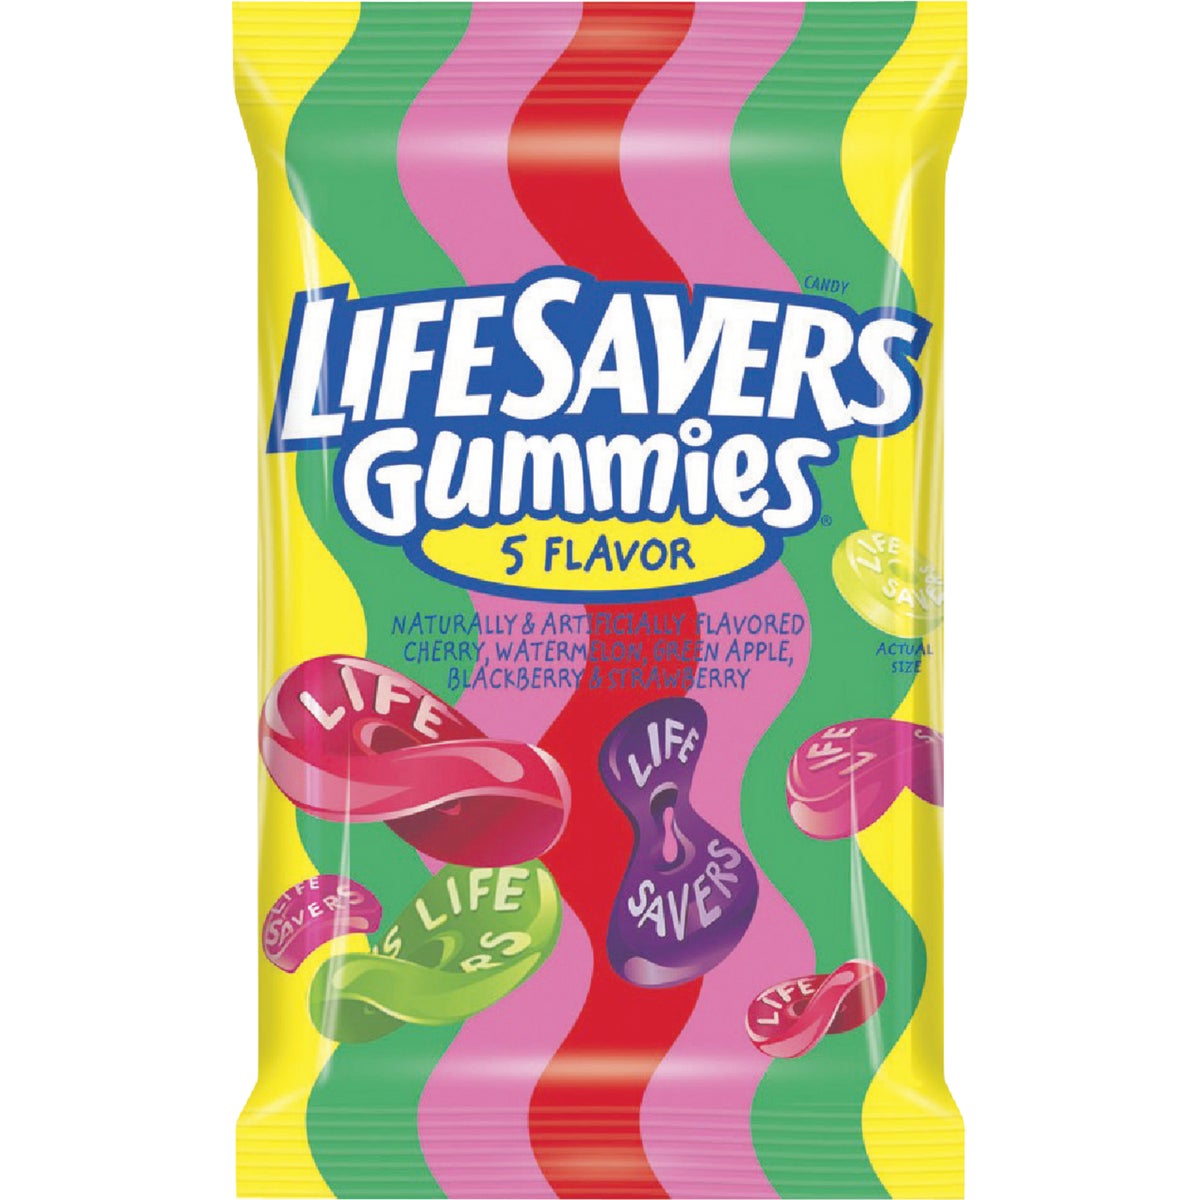 Item 973502, Gummy candies are a perfect assortment of fruity, gummy goodness.